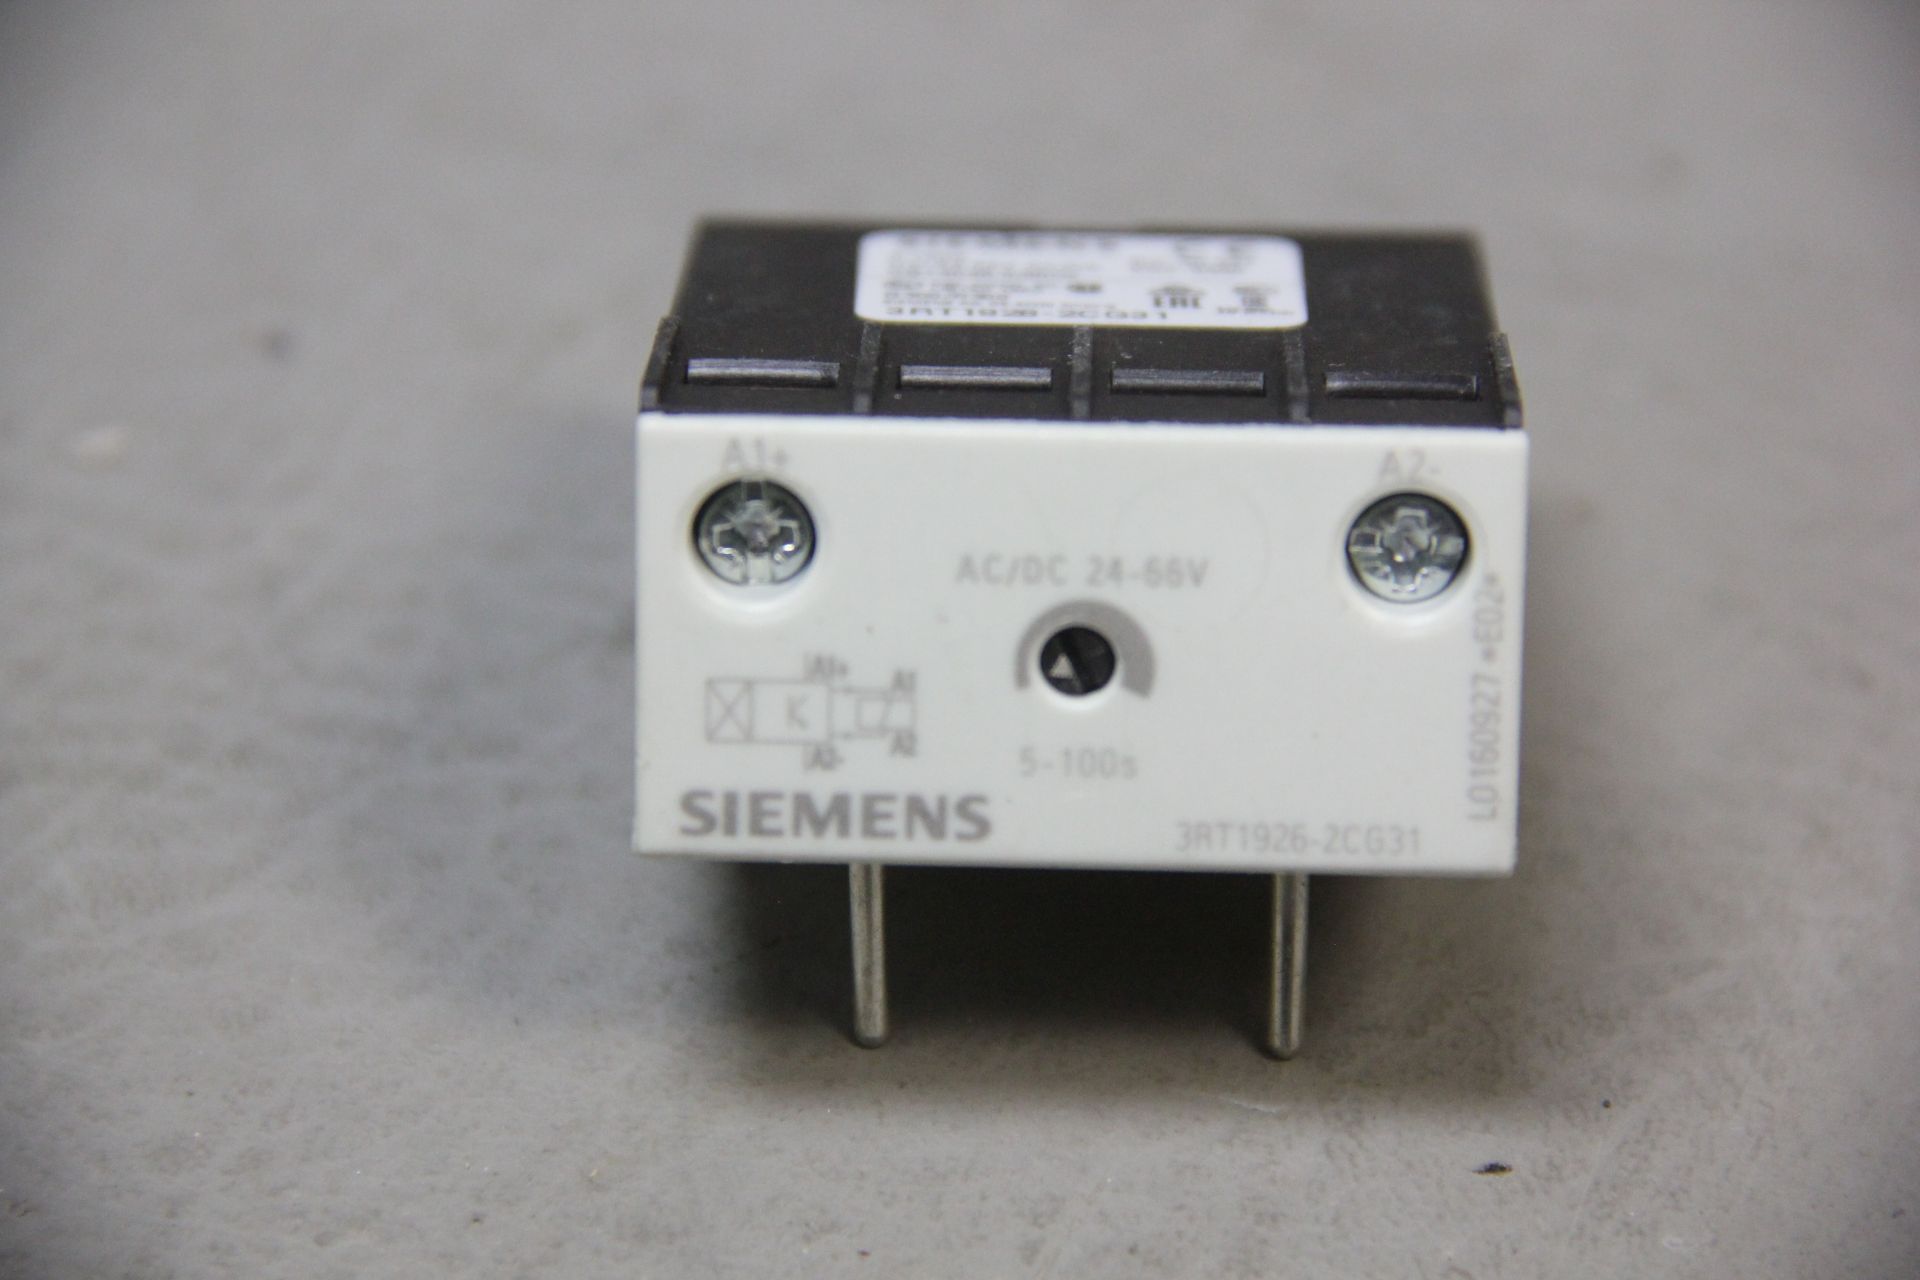 LOT OF UNUSED SIEMENS ELECTRONIC 2 WIRE TIMING RELAYS - Image 2 of 3